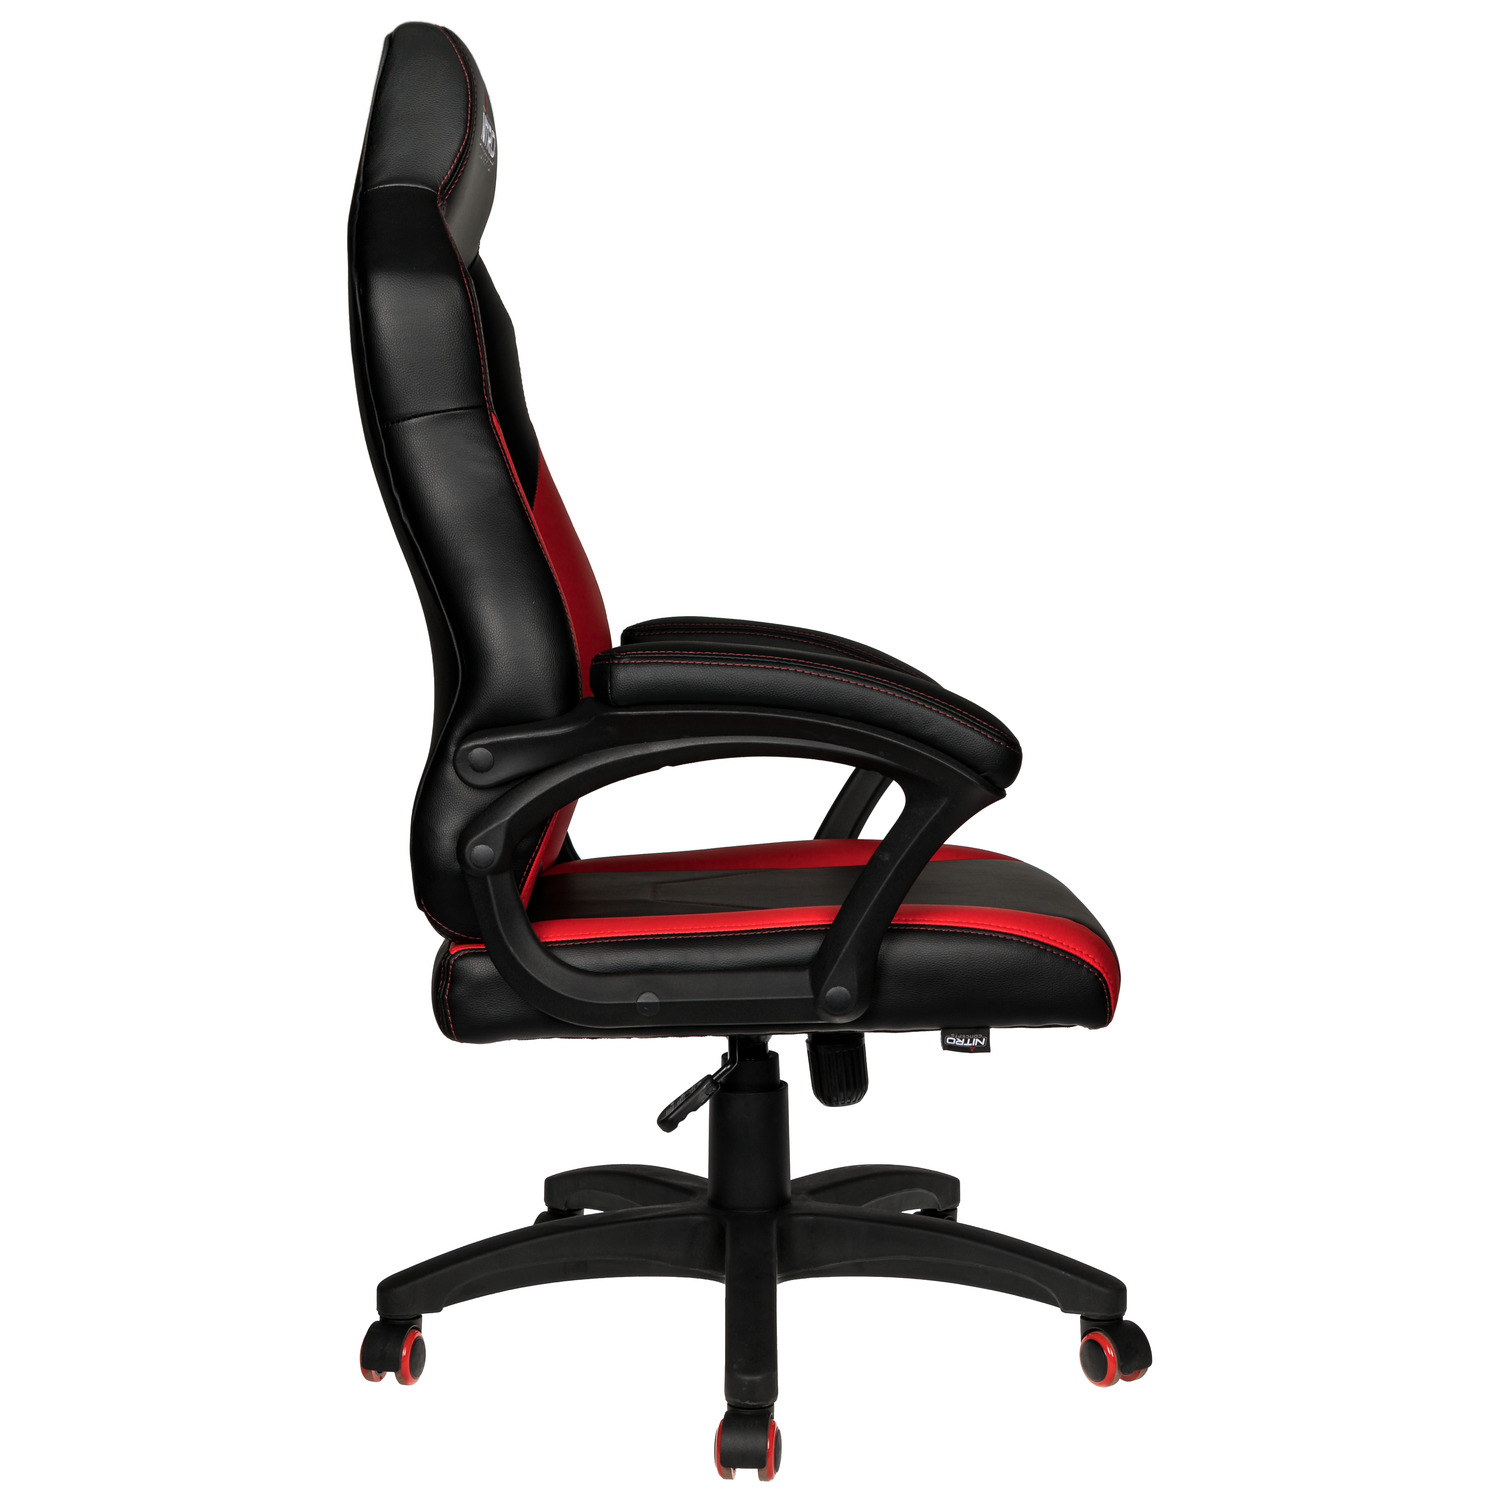 Nitro Concepts - C100 Gaming Chair Black/Red